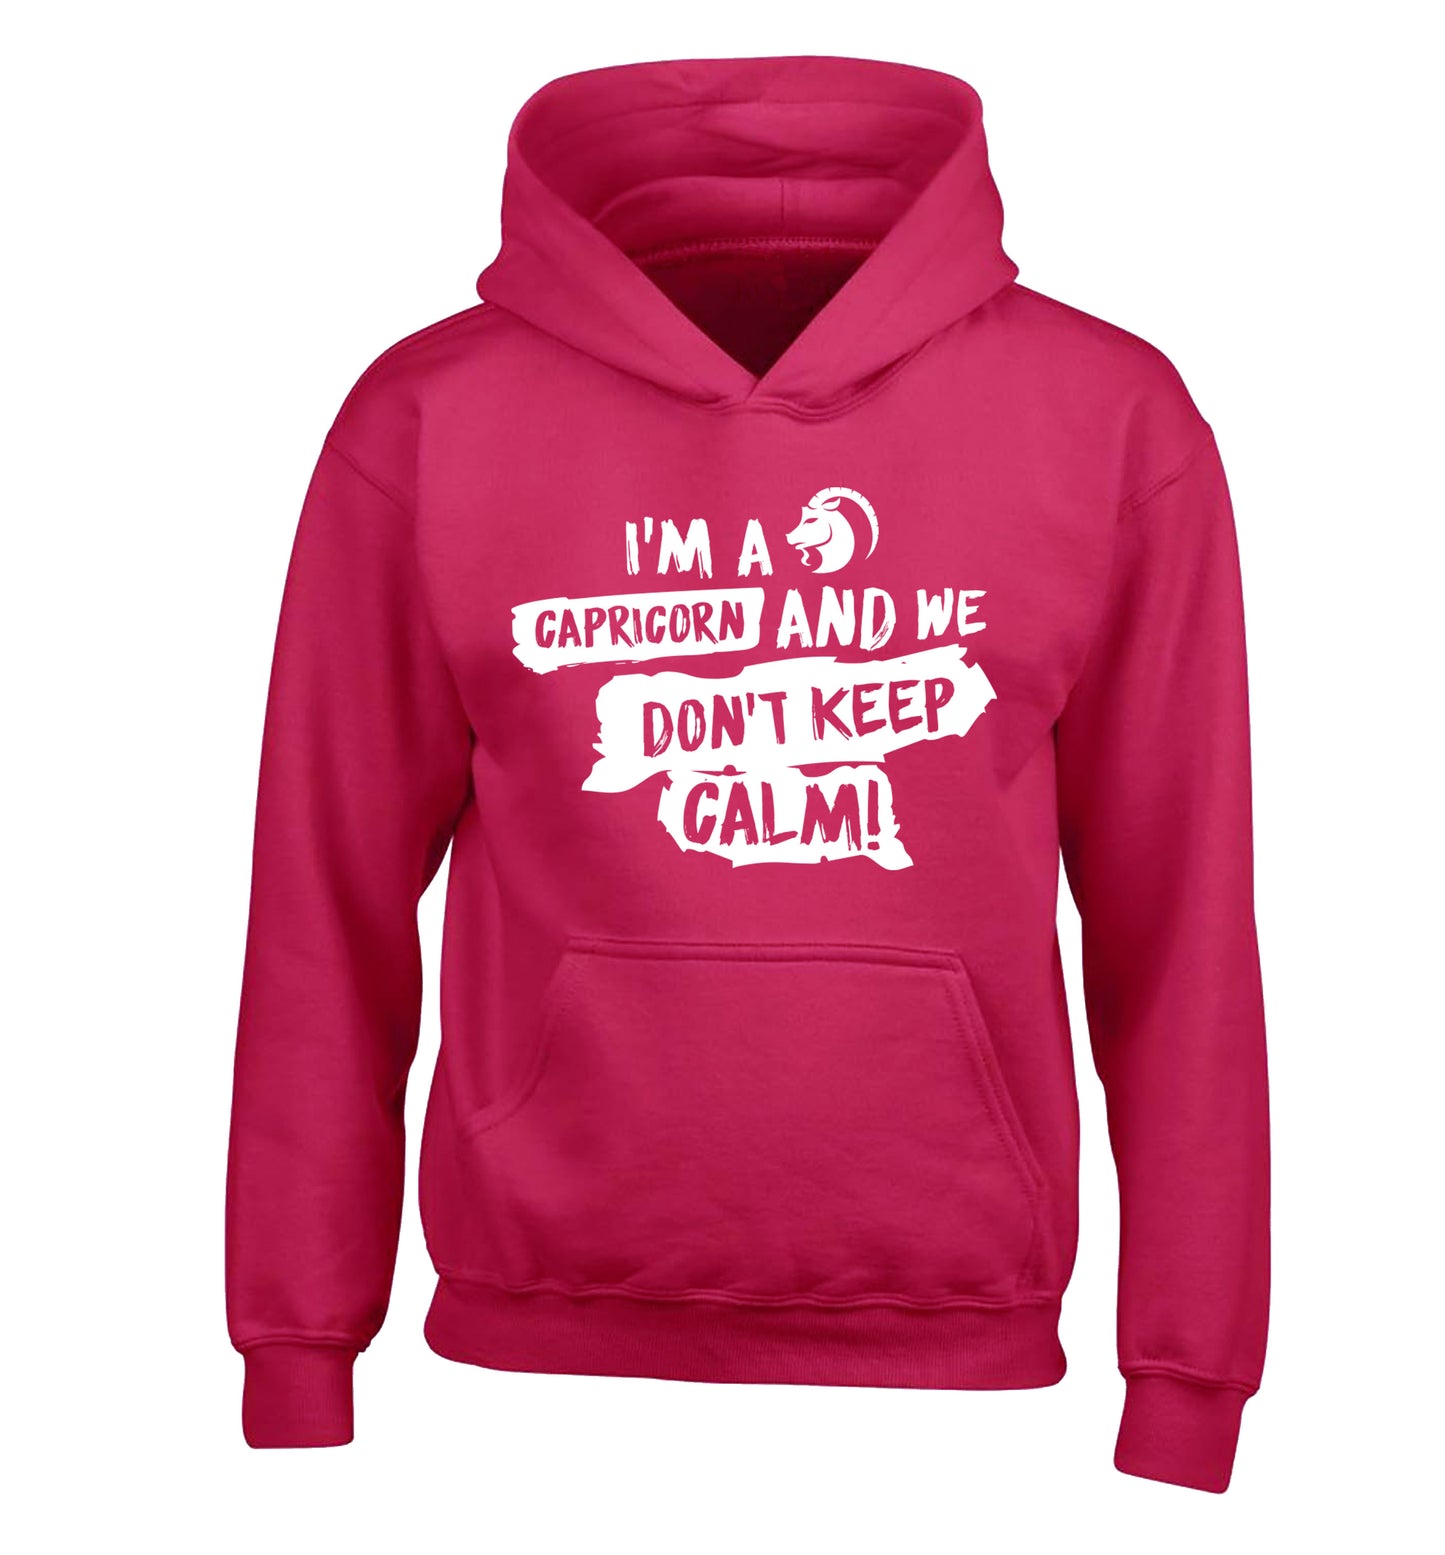 I'm a capricorn and we don't keep calm children's pink hoodie 12-13 Years